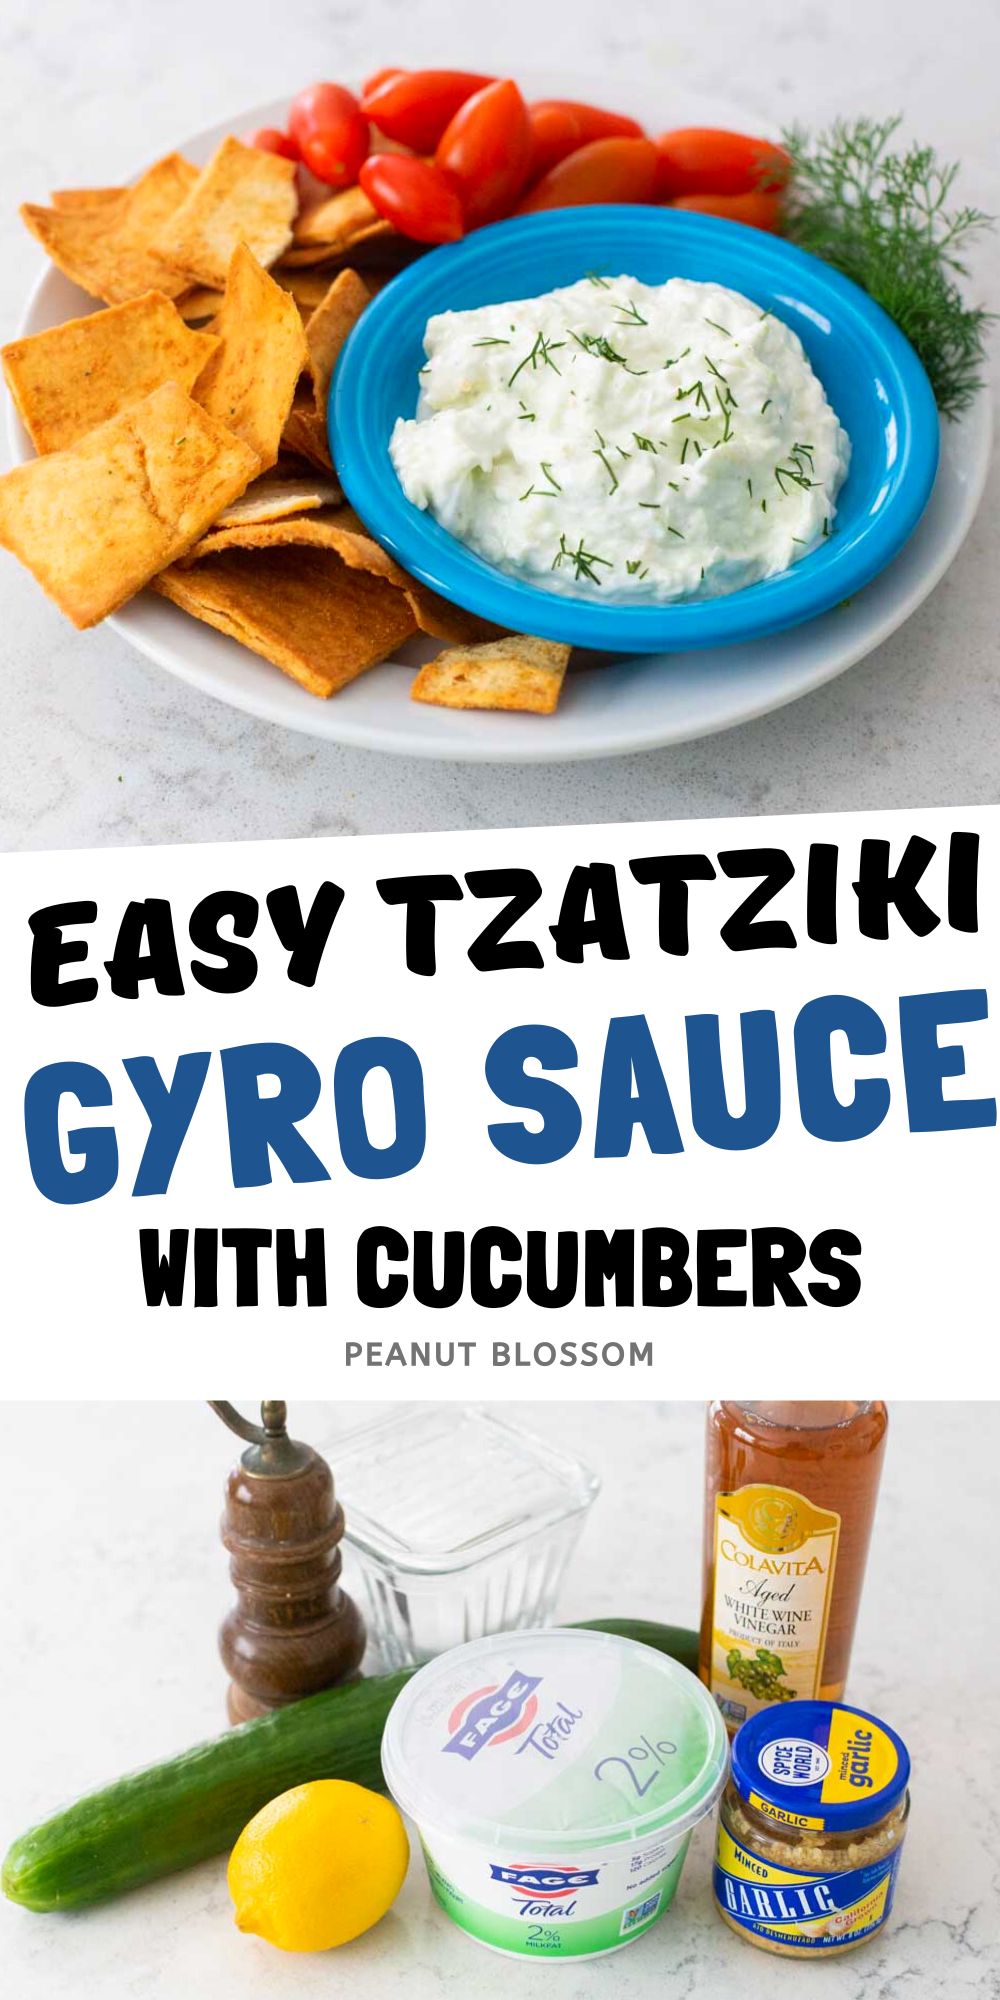 A photo collage shows the finished tzatziki next to a picture of the ingredients.